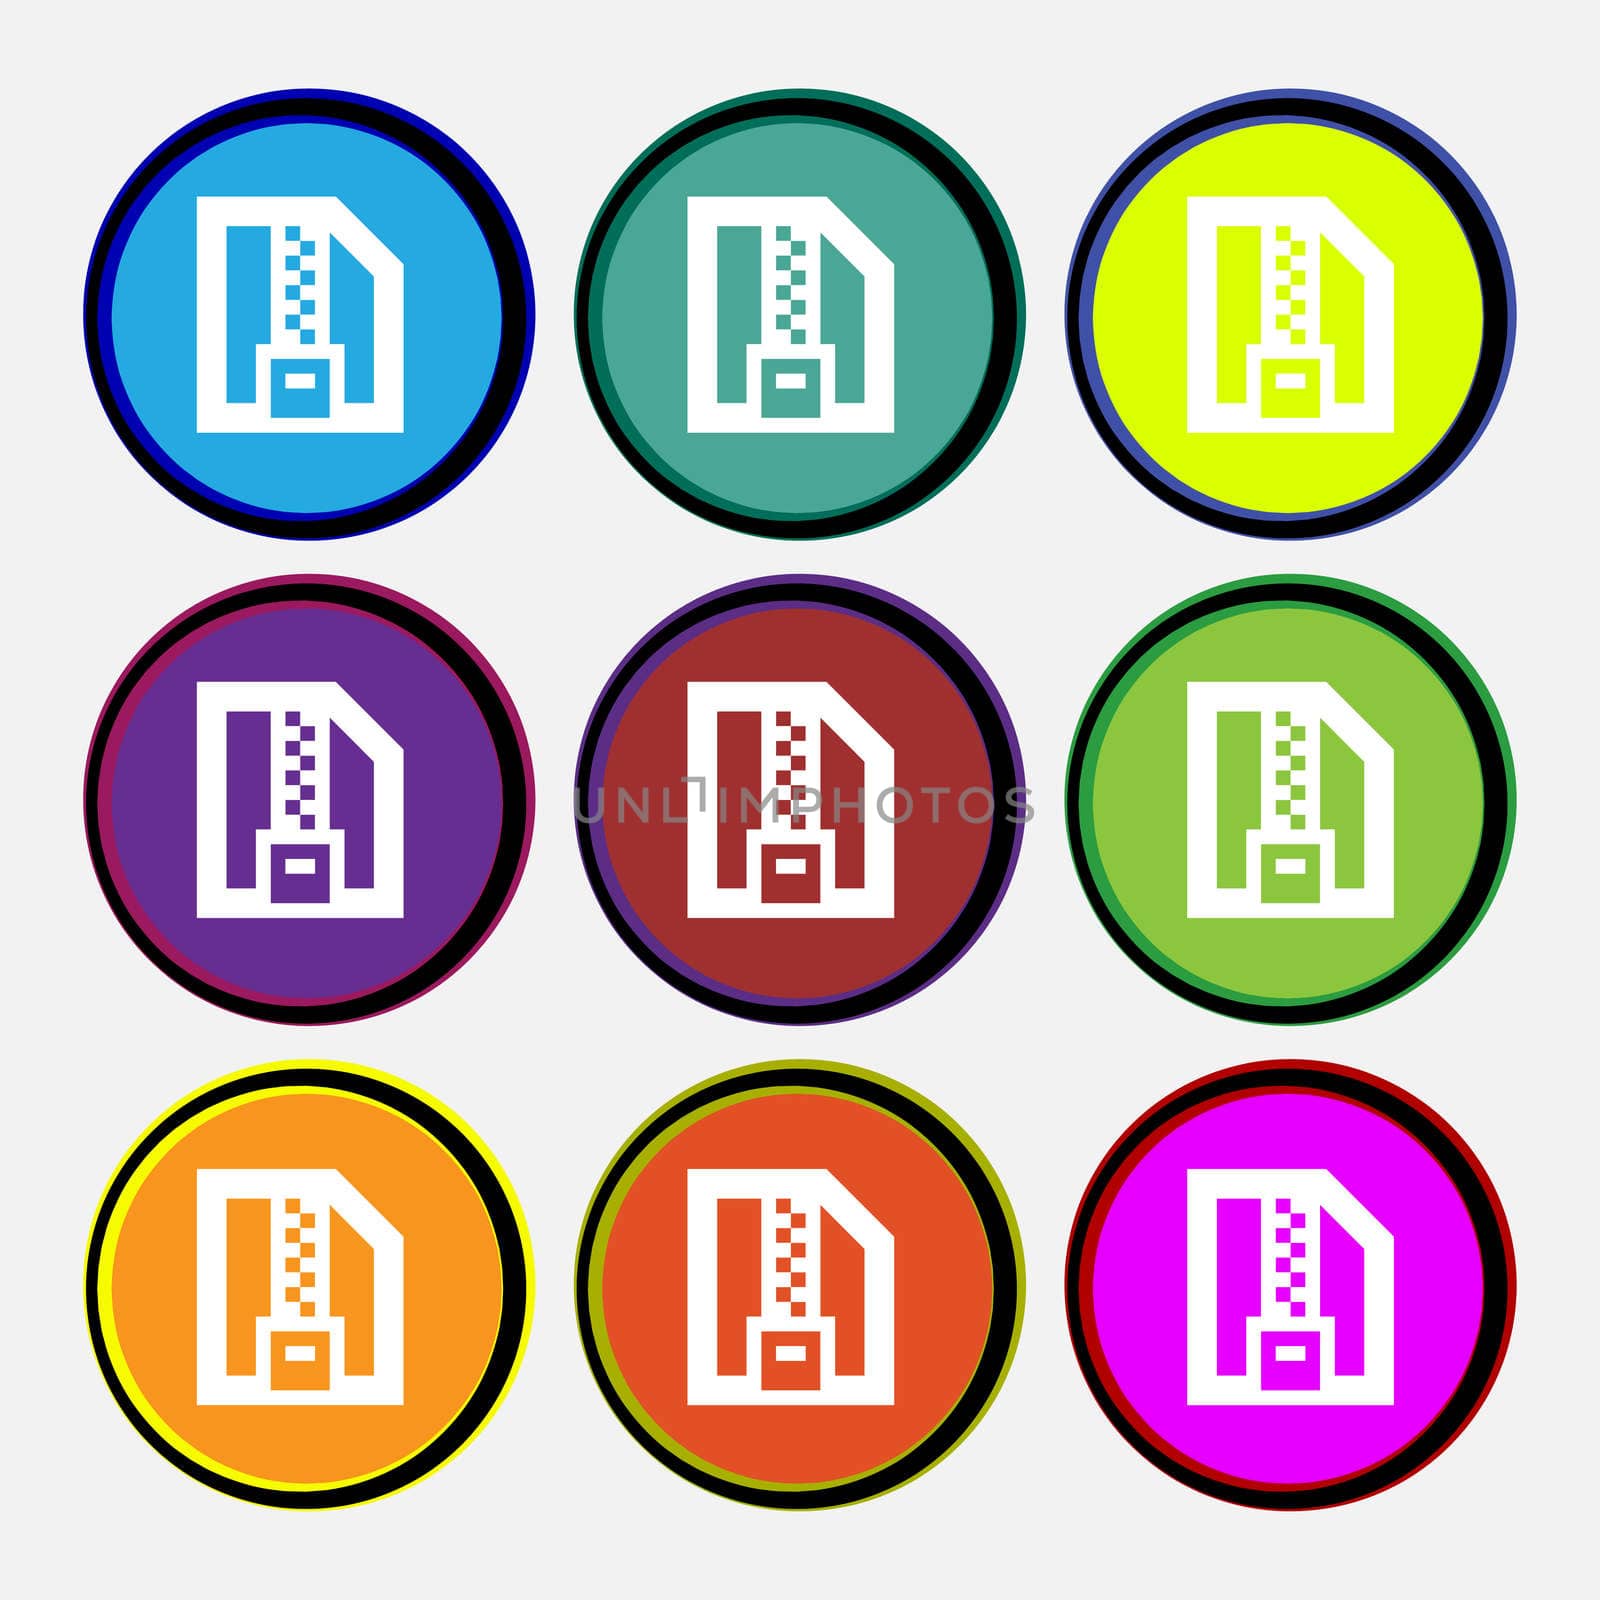 Archive file, Download compressed, ZIP zipped icon sign. Nine multi-colored round buttons. illustration